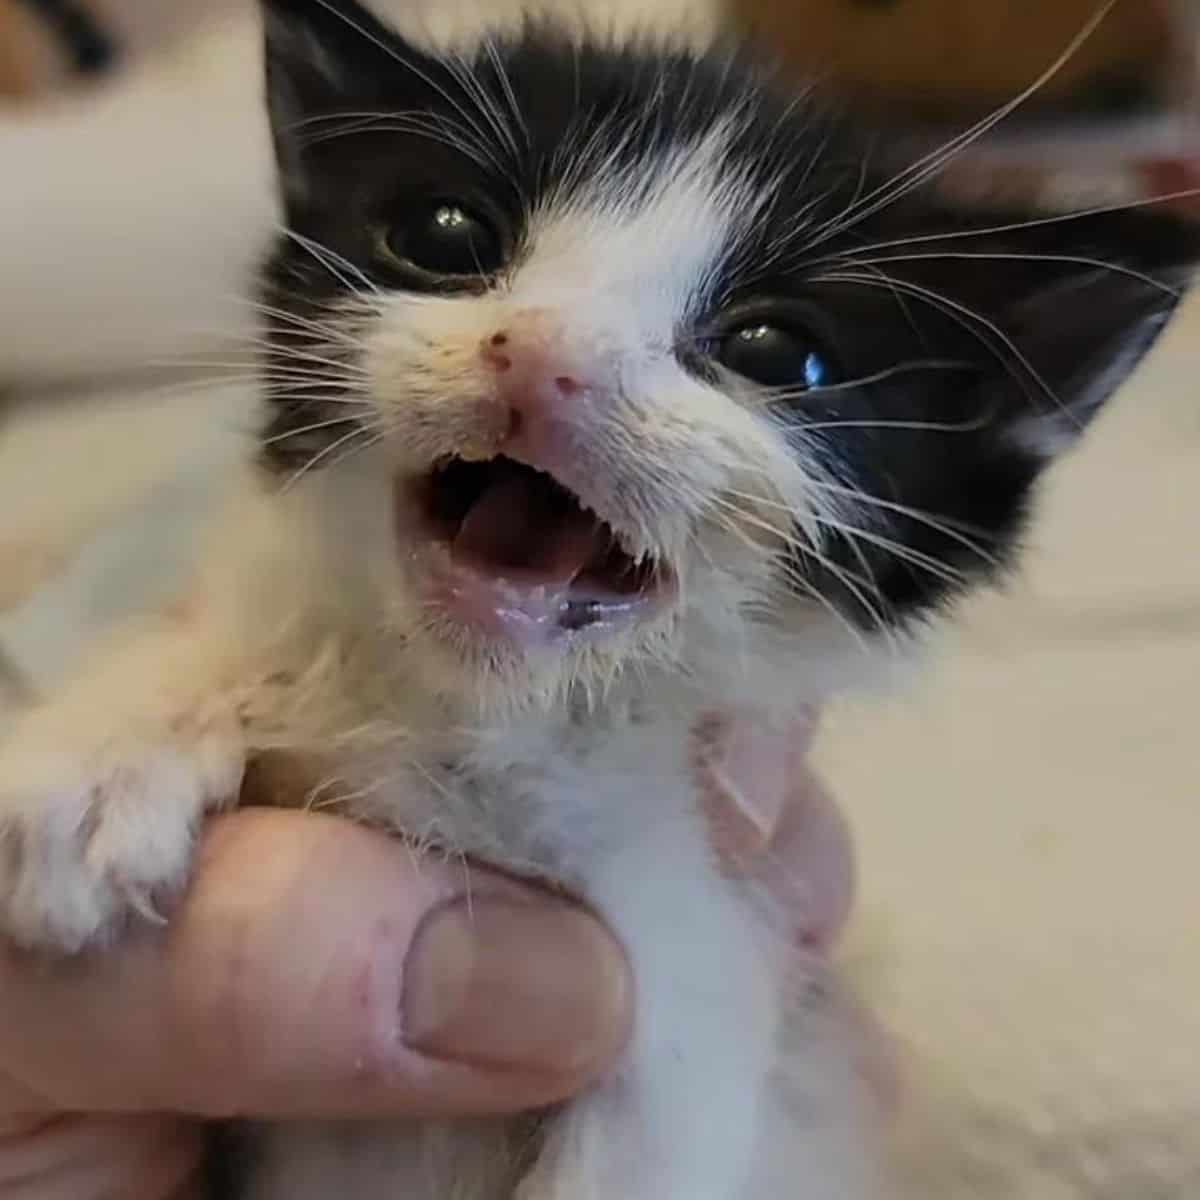 close-up photo of the screaming kitten